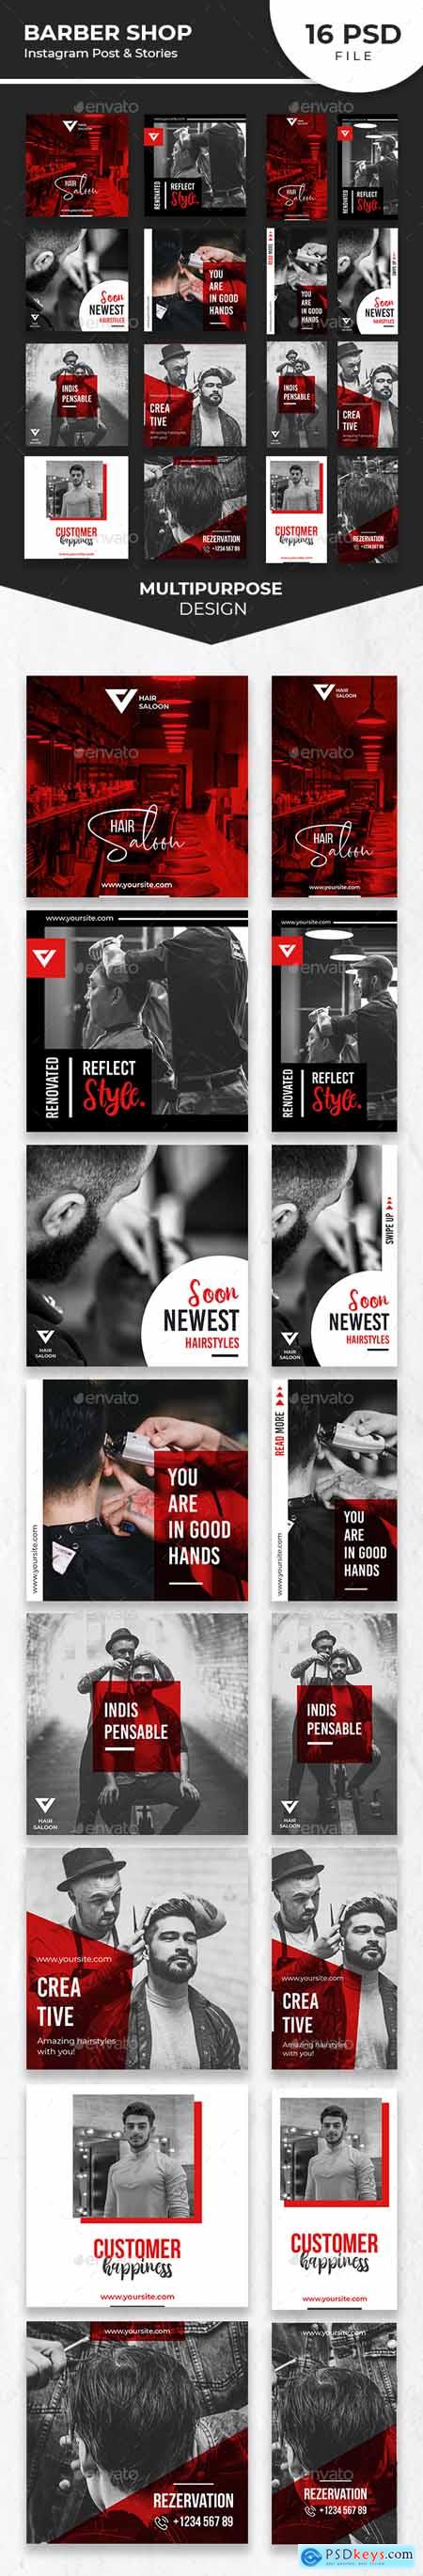 Graphicriver Barber Shop Instagram Post and Stories